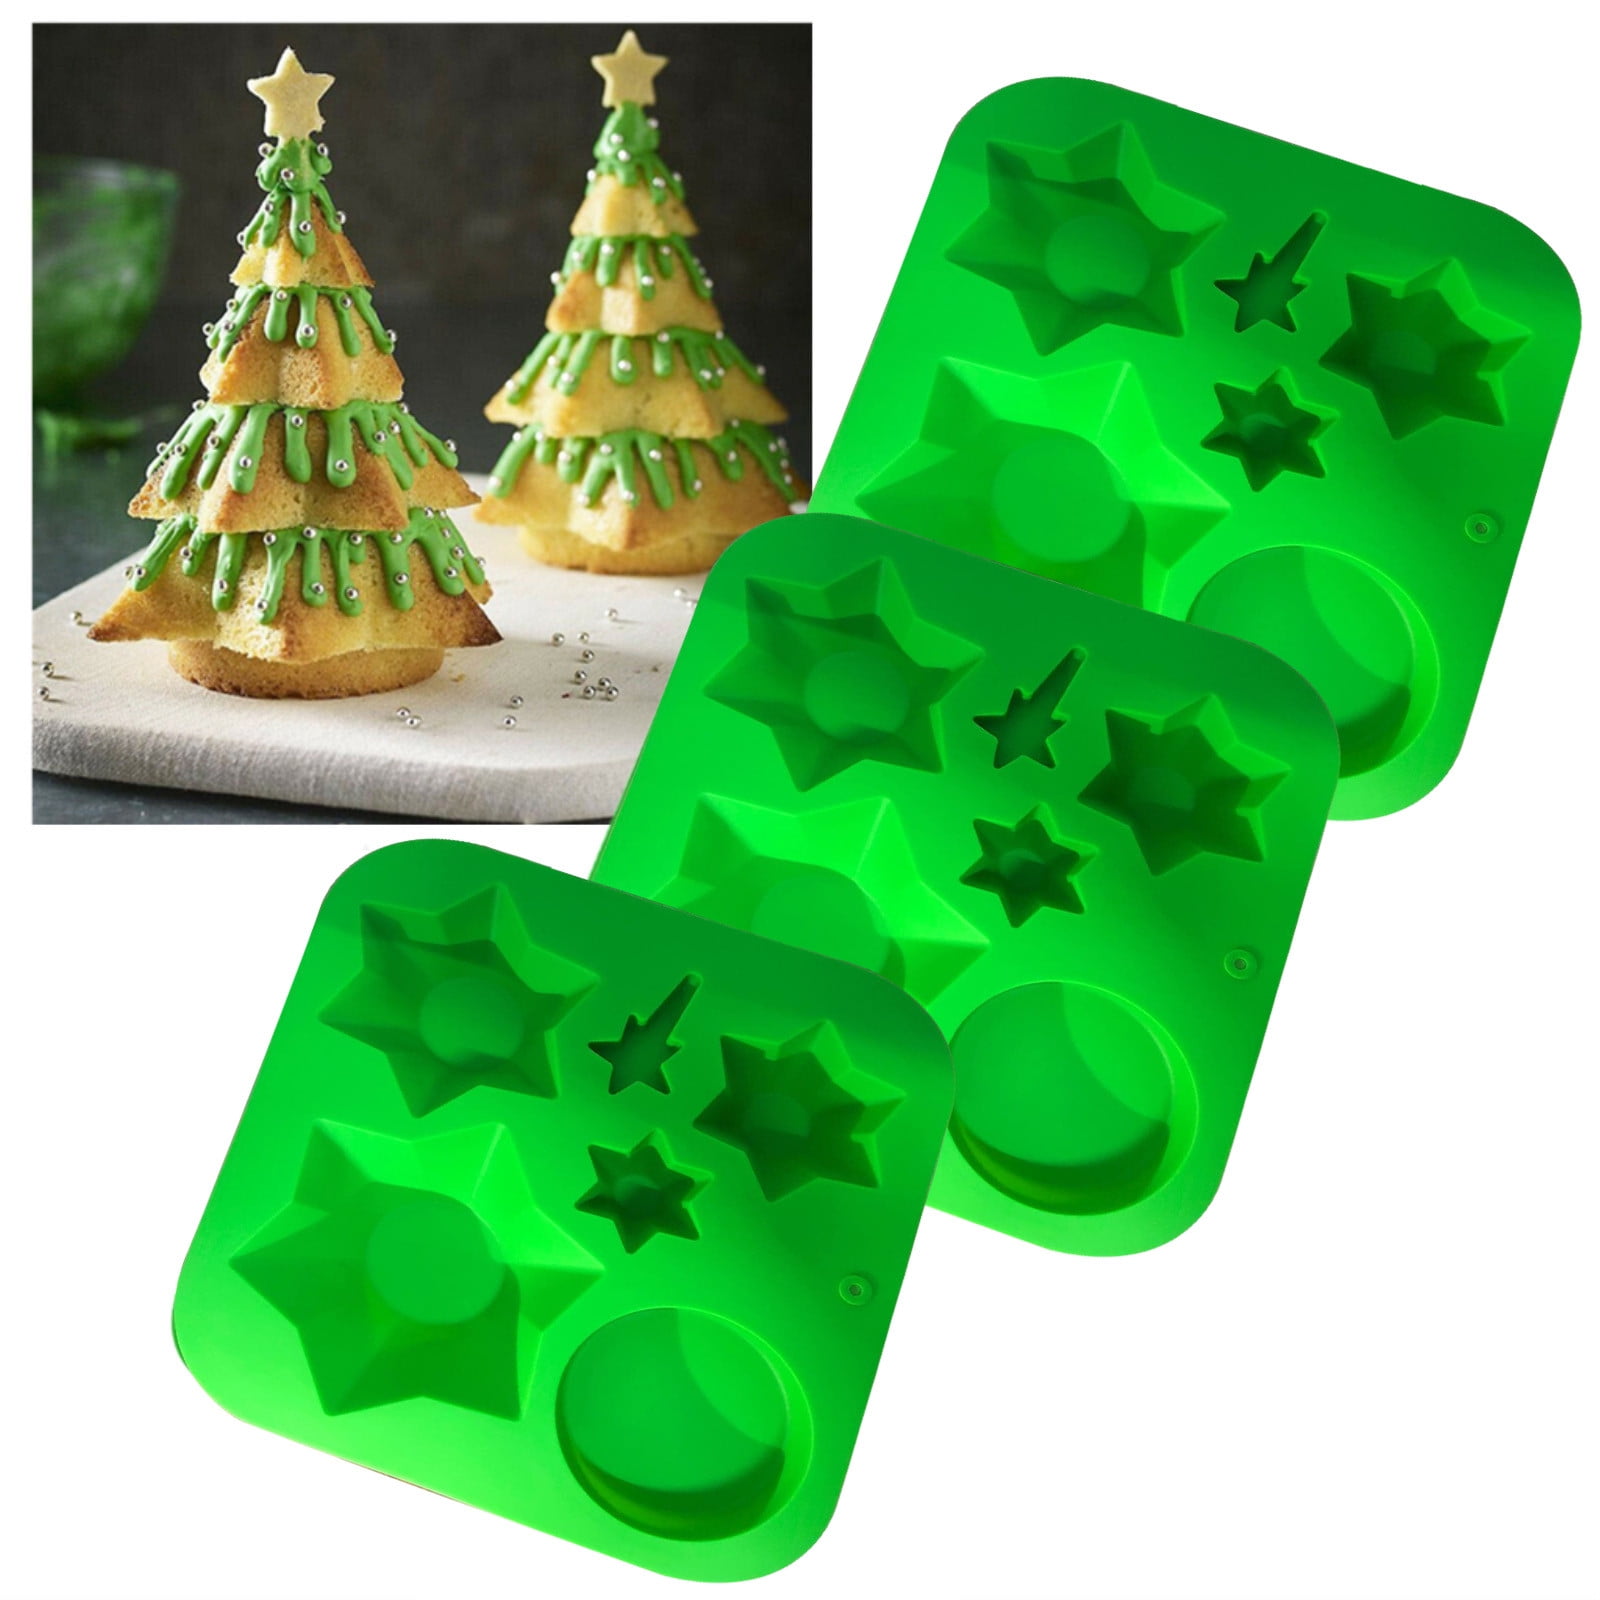 Multi-Layered 3D Christmas Tree Cake Mould DIY Christmas Silicone Cake Mould Ice Cubes Tray Jelly Wax Mould for Christmas New Year Parties Baking Supplies